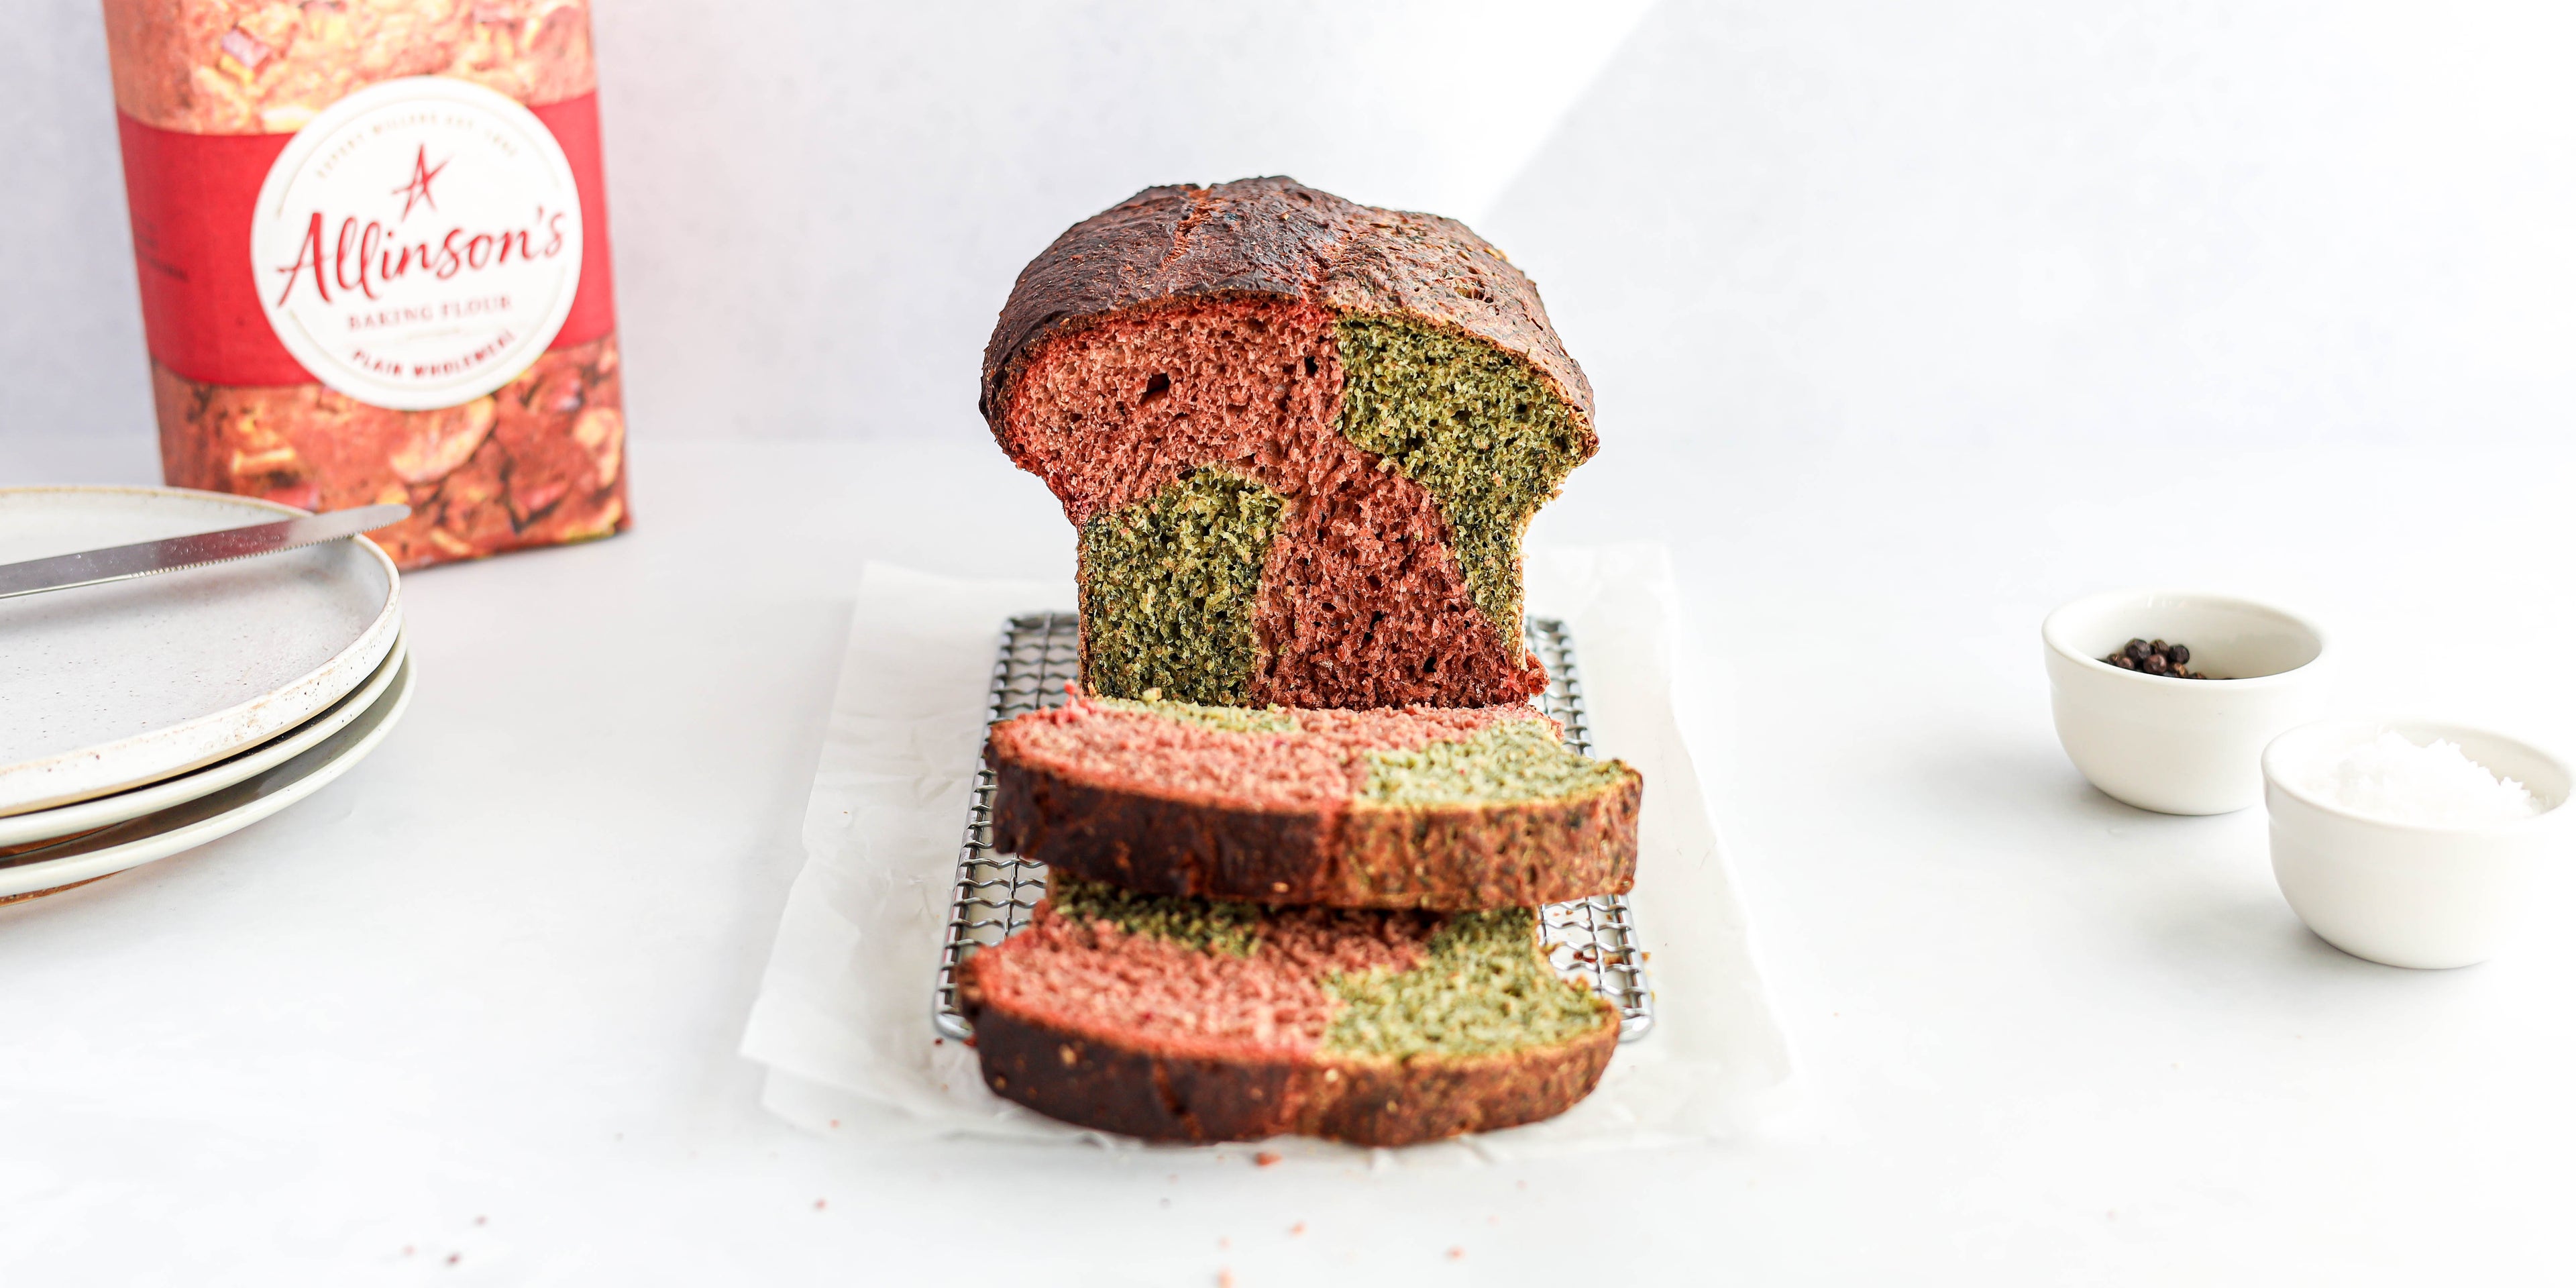 Marble Vegetable Bread cut on a wire rack, showing the pink and green inside. Bag of Allinson's flour in the background